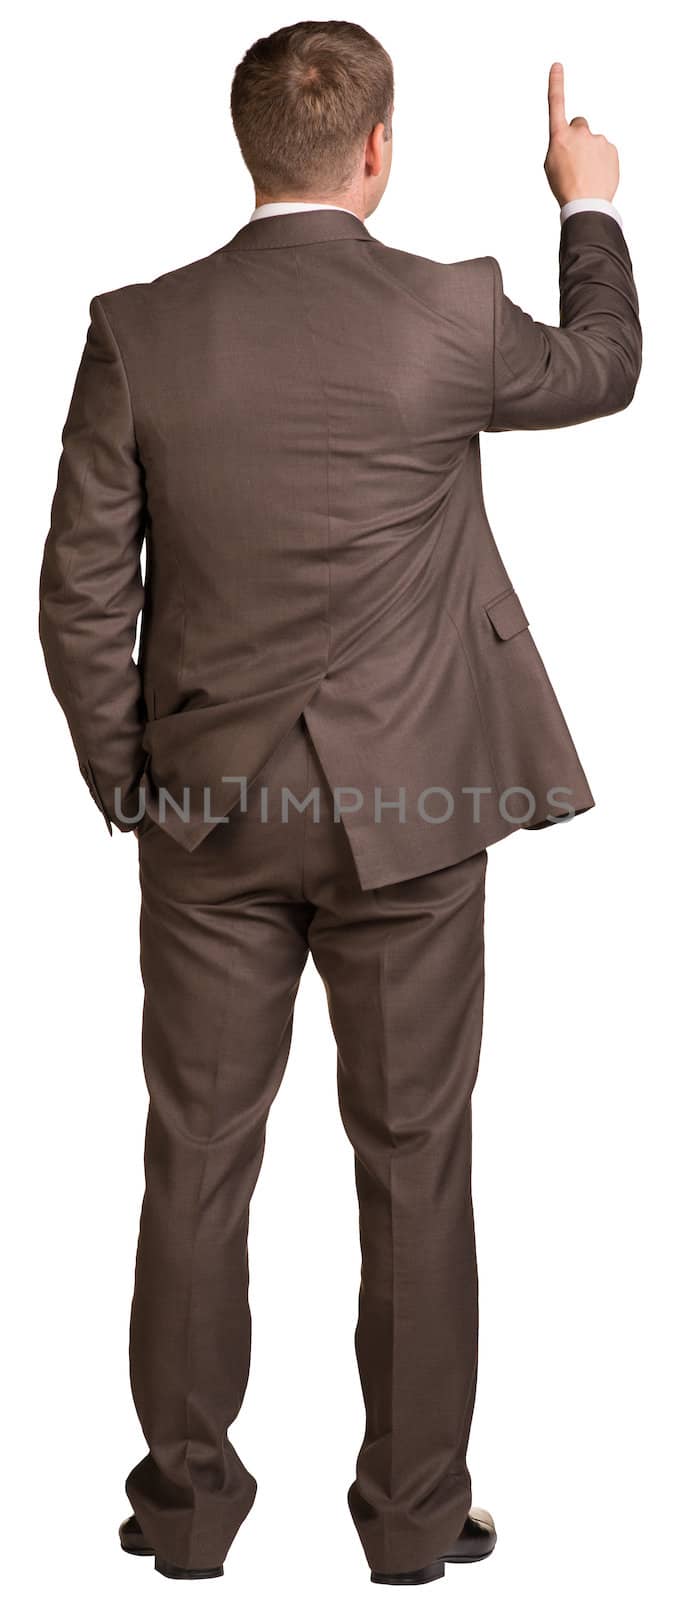 Businessman holding hand up in front of him. Rear view. Isolated on white background.